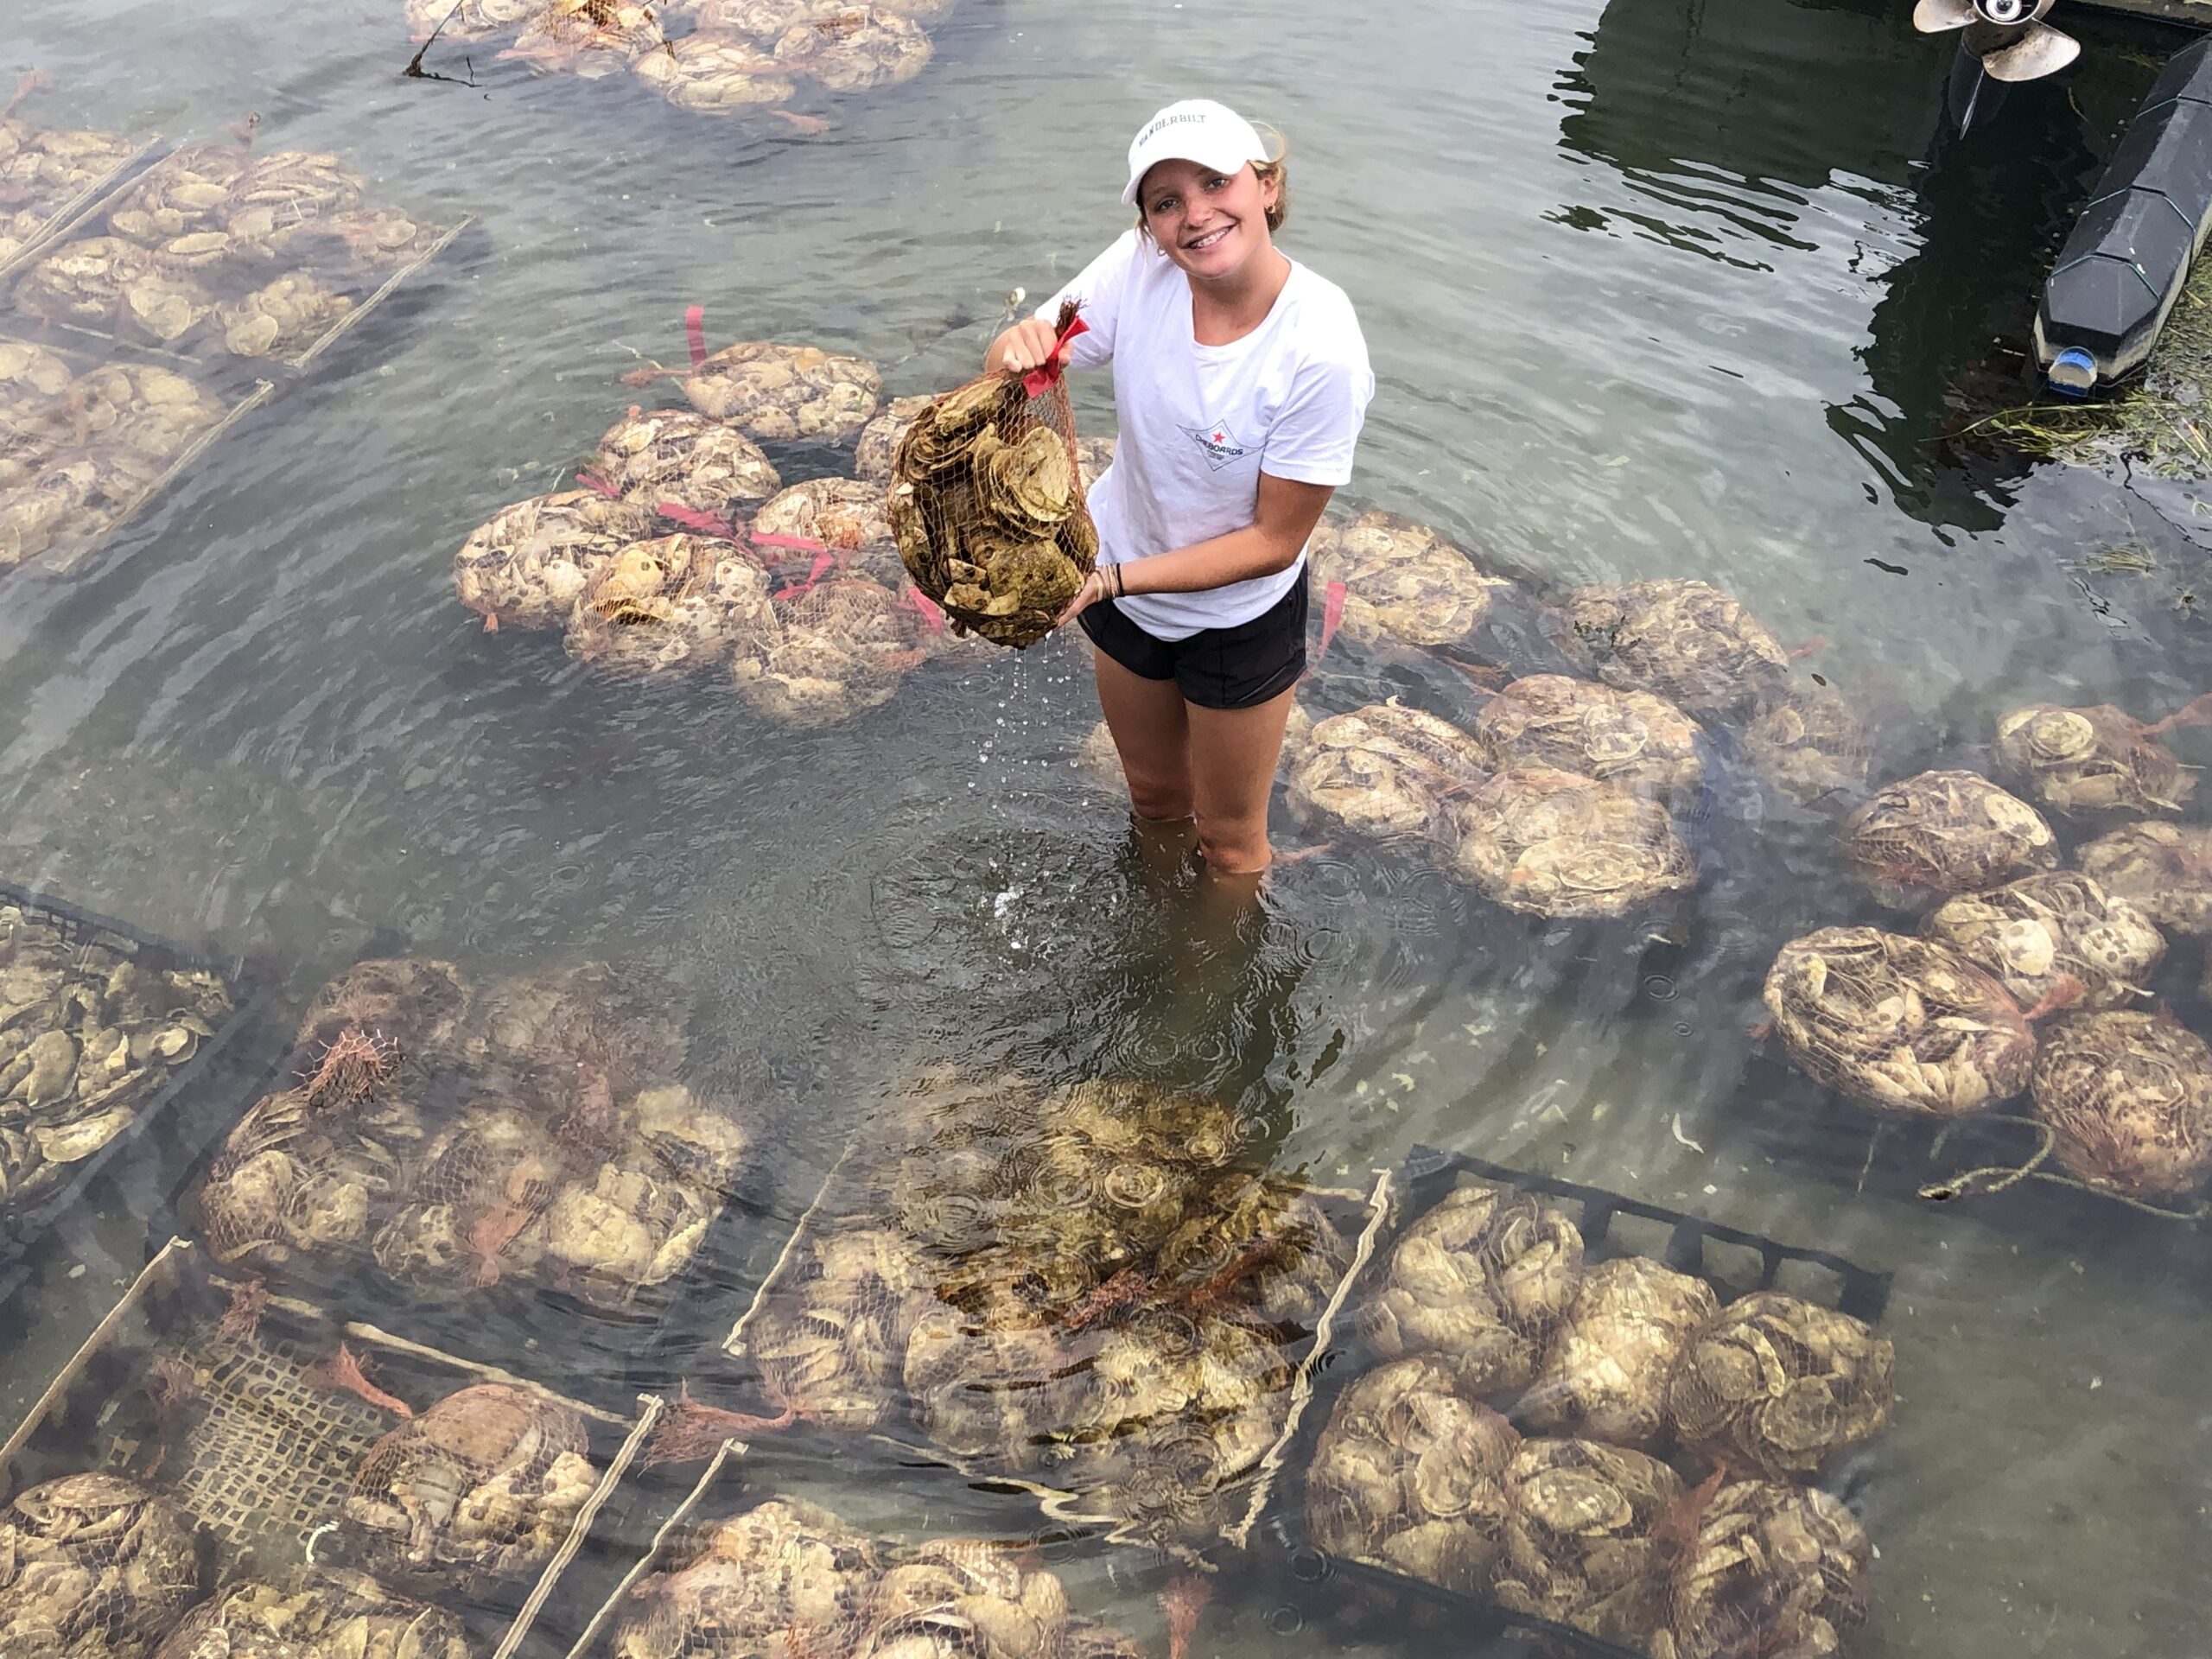 High schooler Skye Tanzmann working with the East Hampton Shellfish Hatchery to establish an oyster reef in order to help clean the bay and bring back marine life. JENNY NOBLE